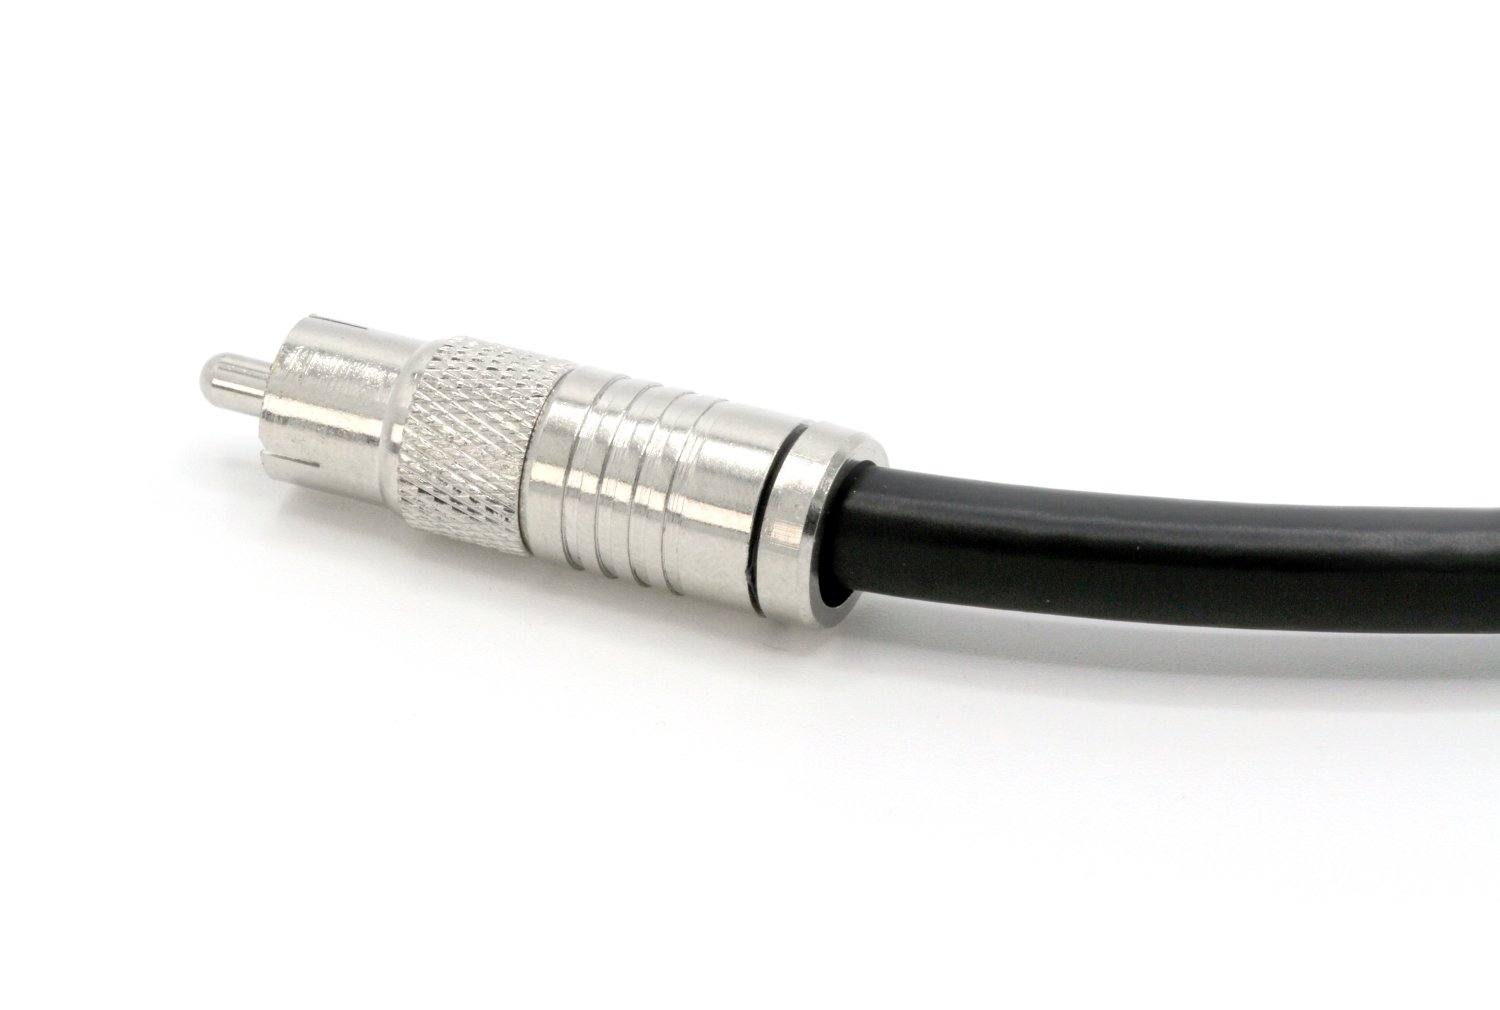 THE CIMPLE CO - Digital Audio Coaxial Cable - Subwoofer Cable - (S/PDIF) RCA Cable, 150 Feet - image 3 of 6